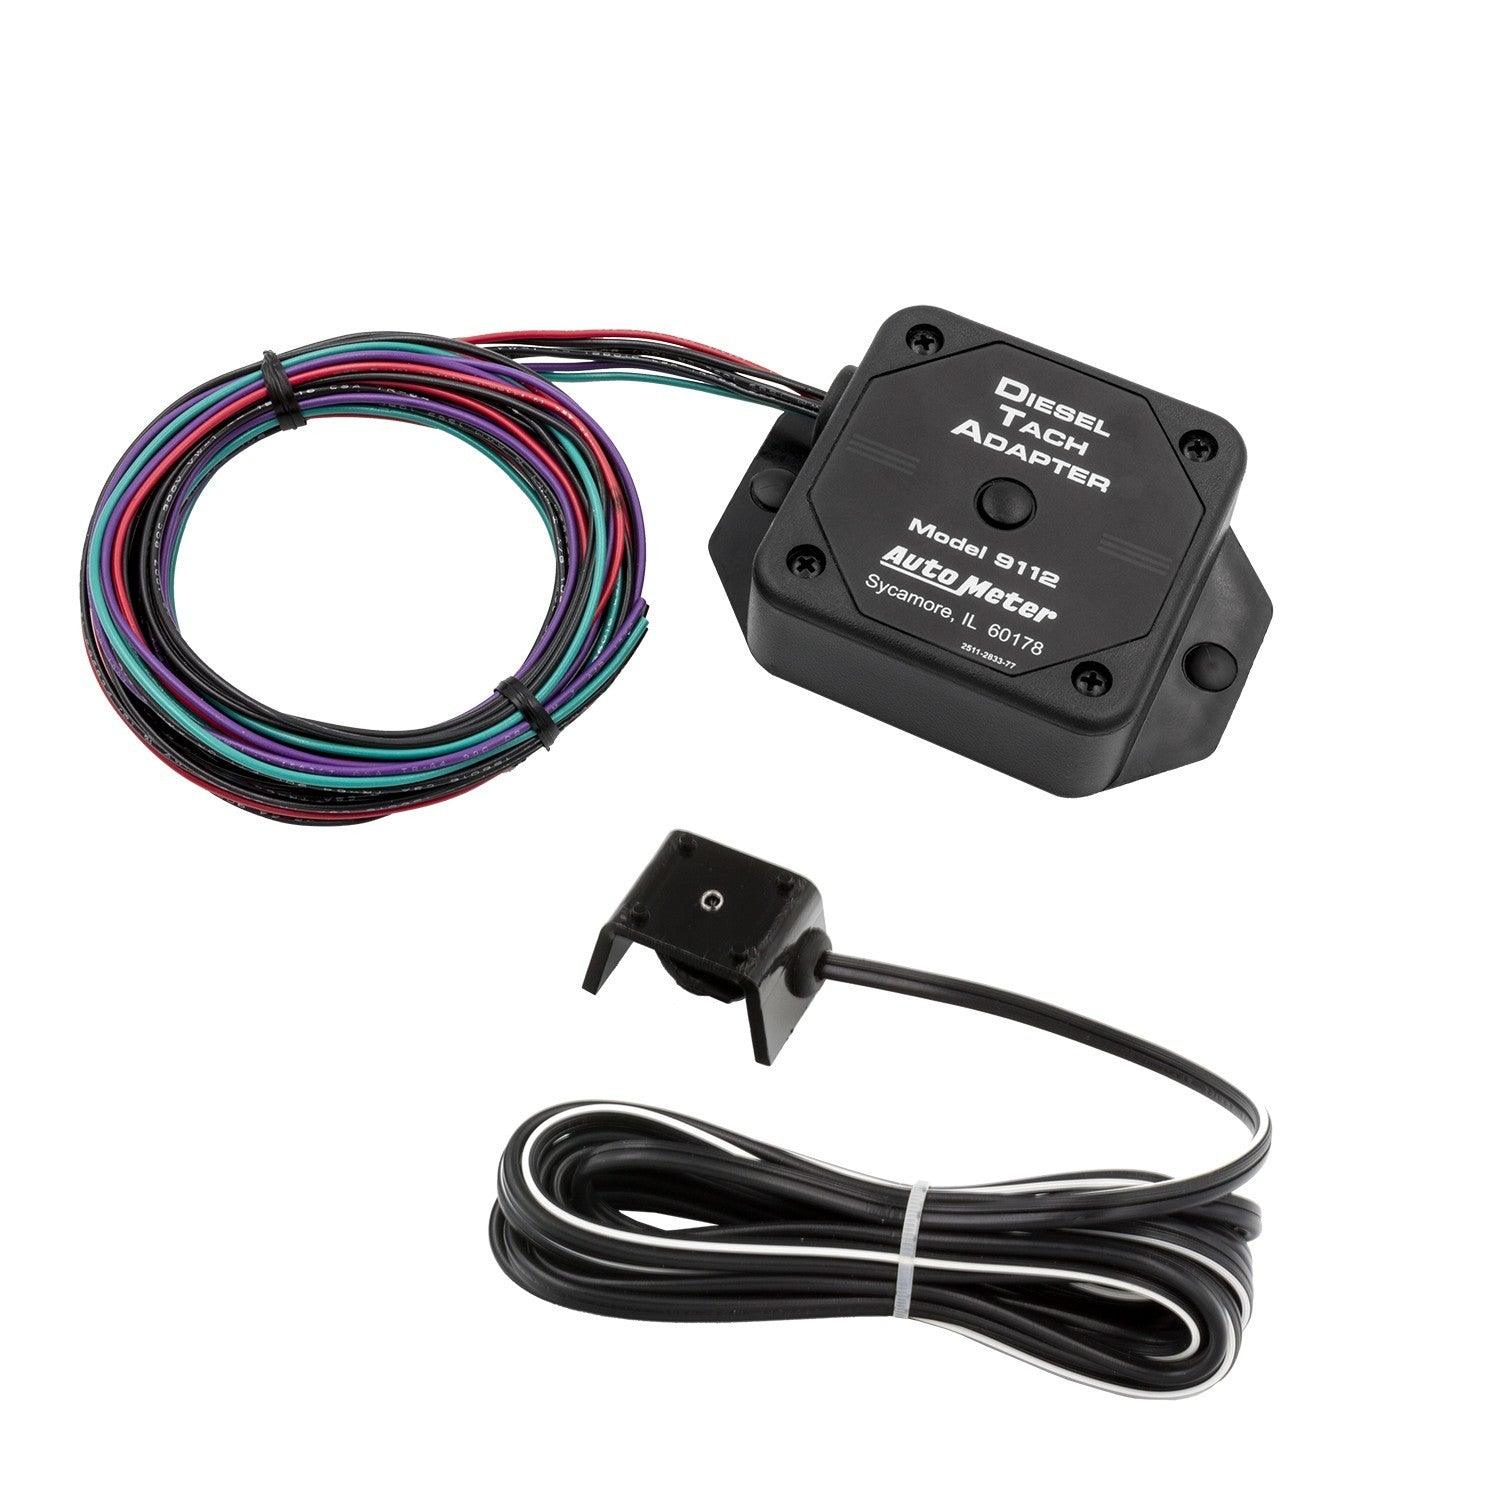 Adapter RPM Signal Ford Diesel Engines - Burlile Performance Products